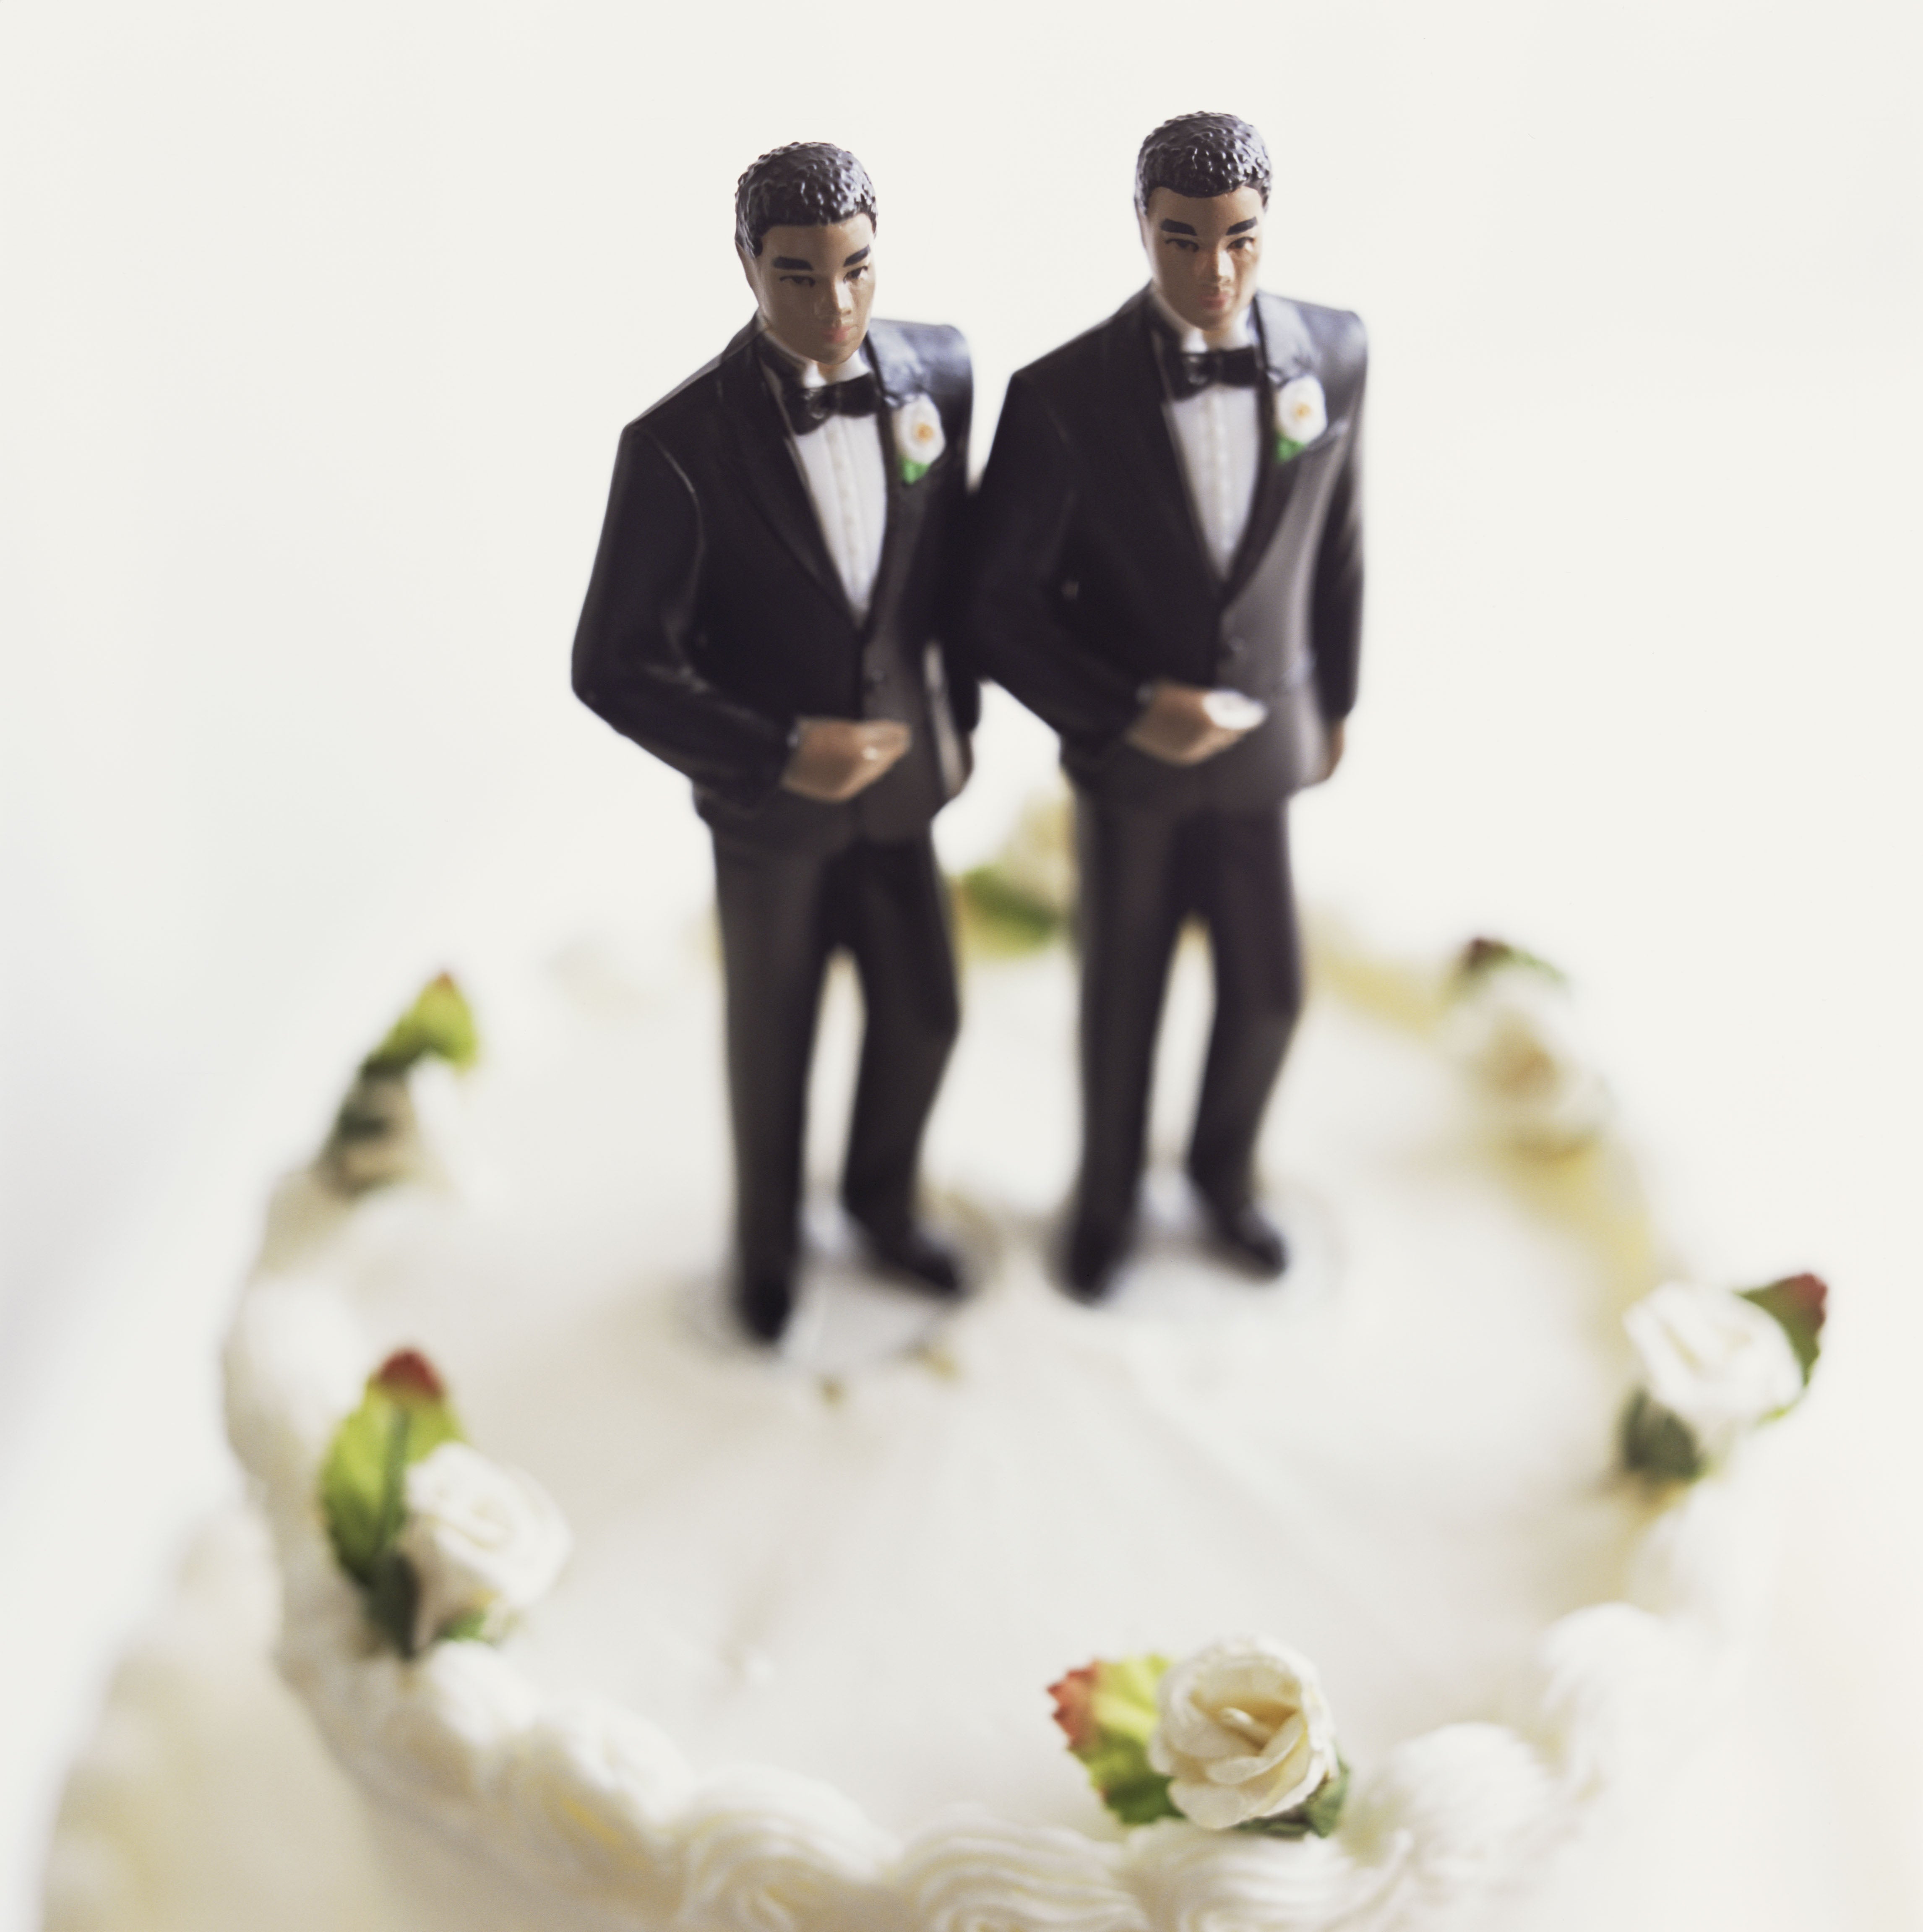 Why Are We Still Debating Gay Marriage?